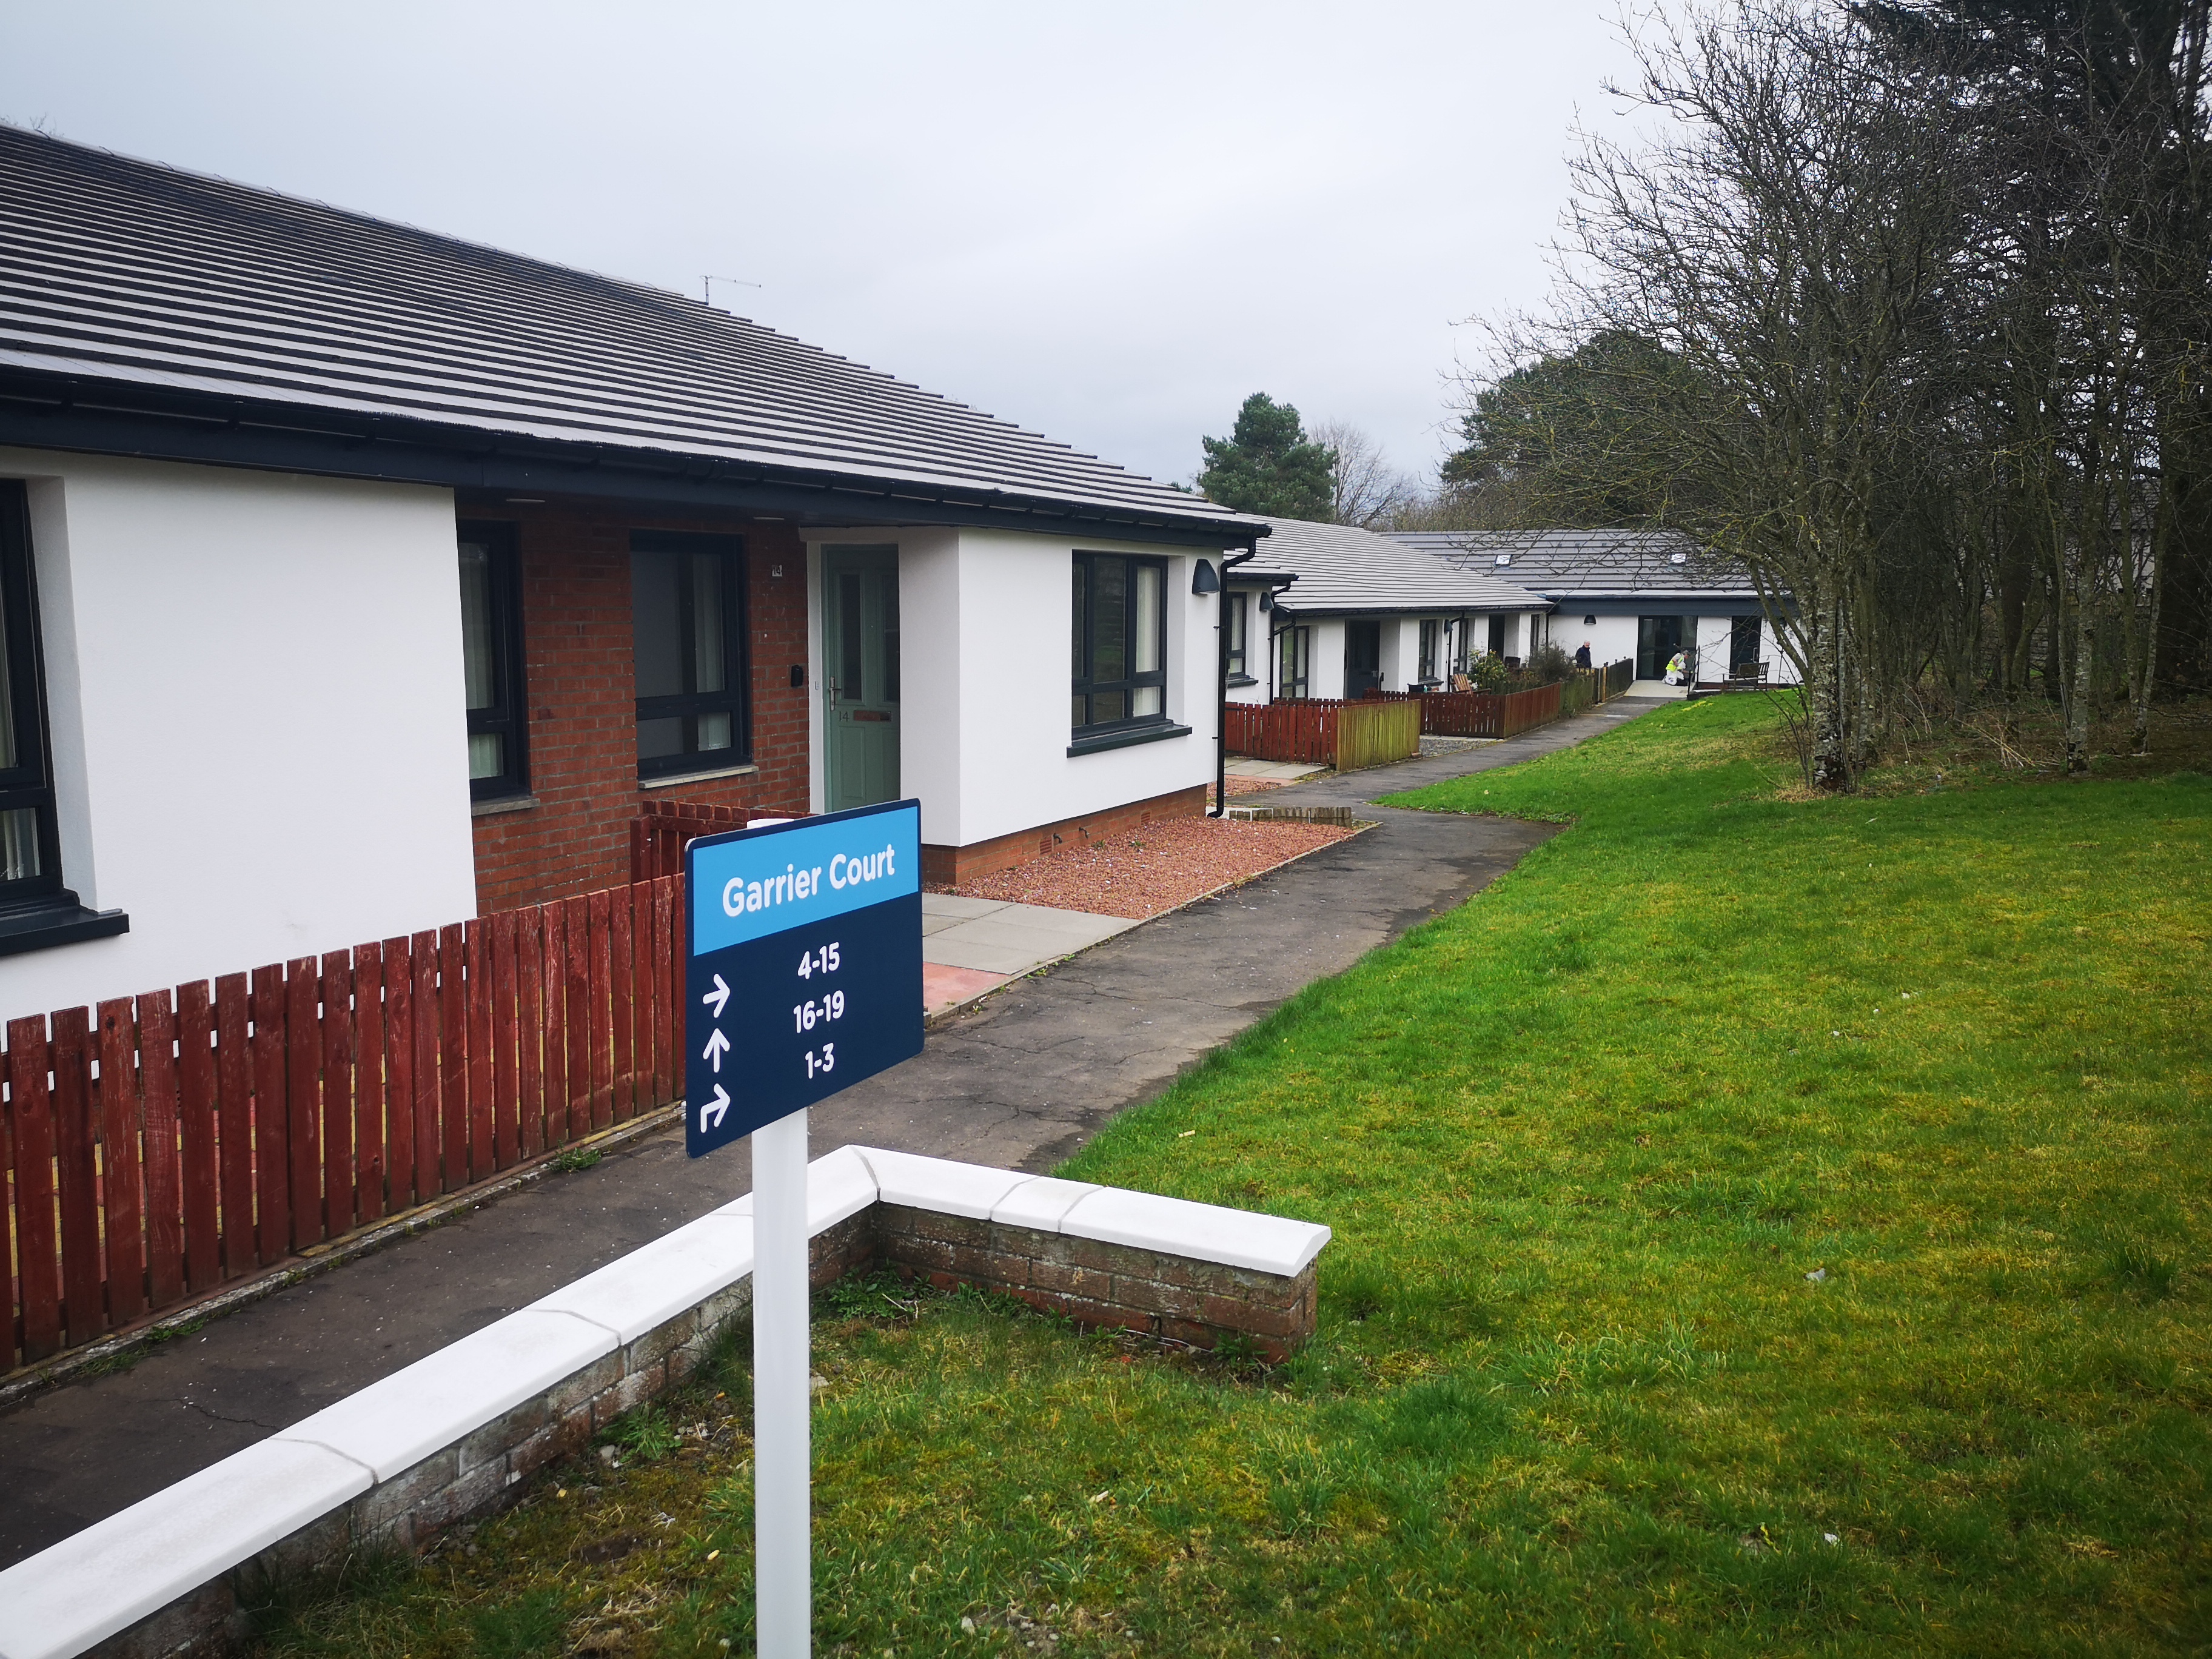 North Ayrshire Council completes improvement works at Garrier Court